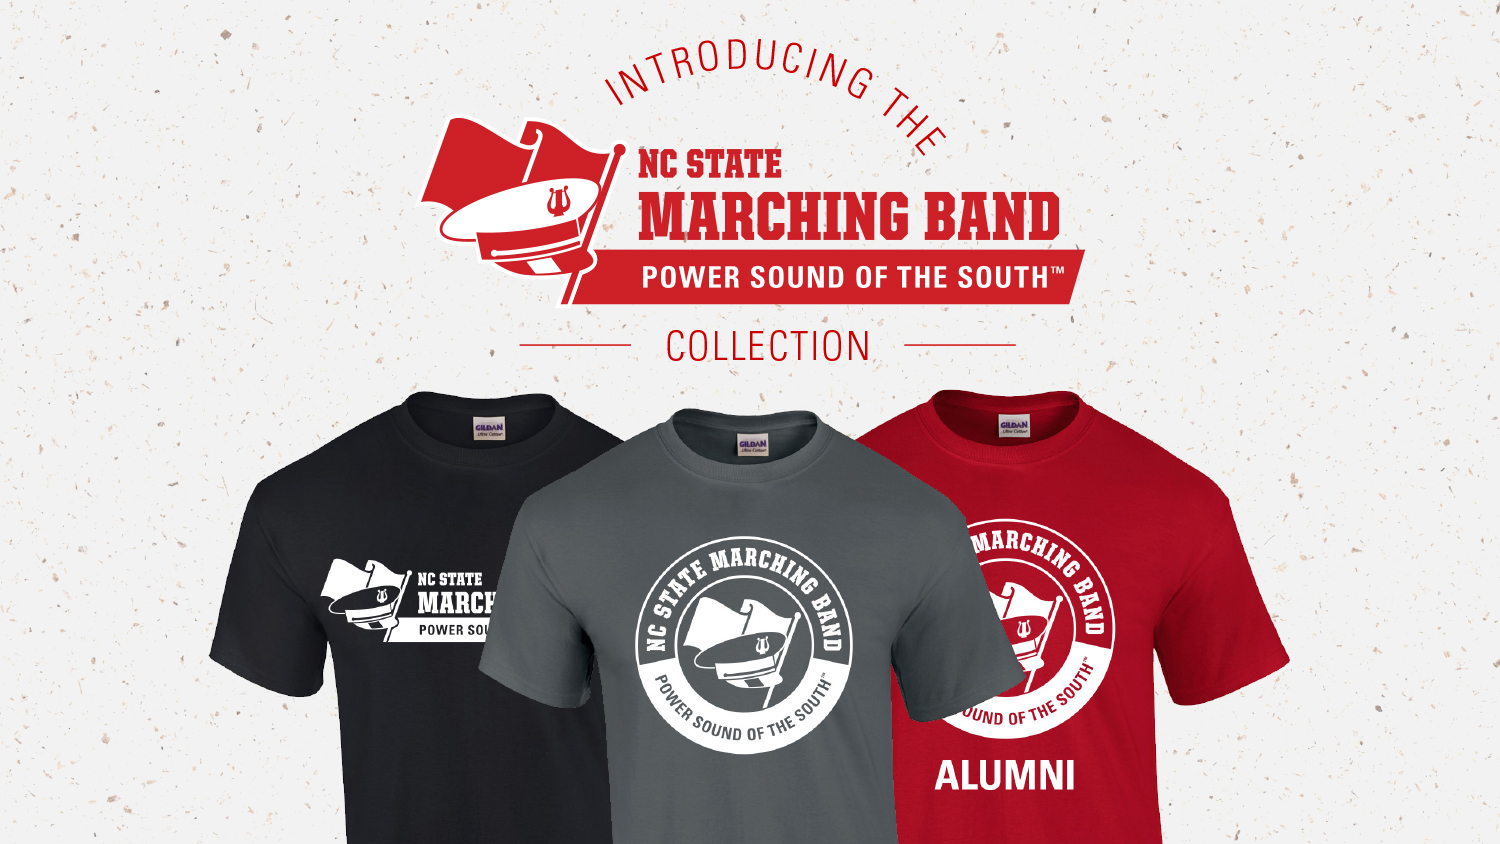 Three T-shirts with "NC State Marching Band - Power Sound of the South" written on them, along with a logo showing marching band hat and flag